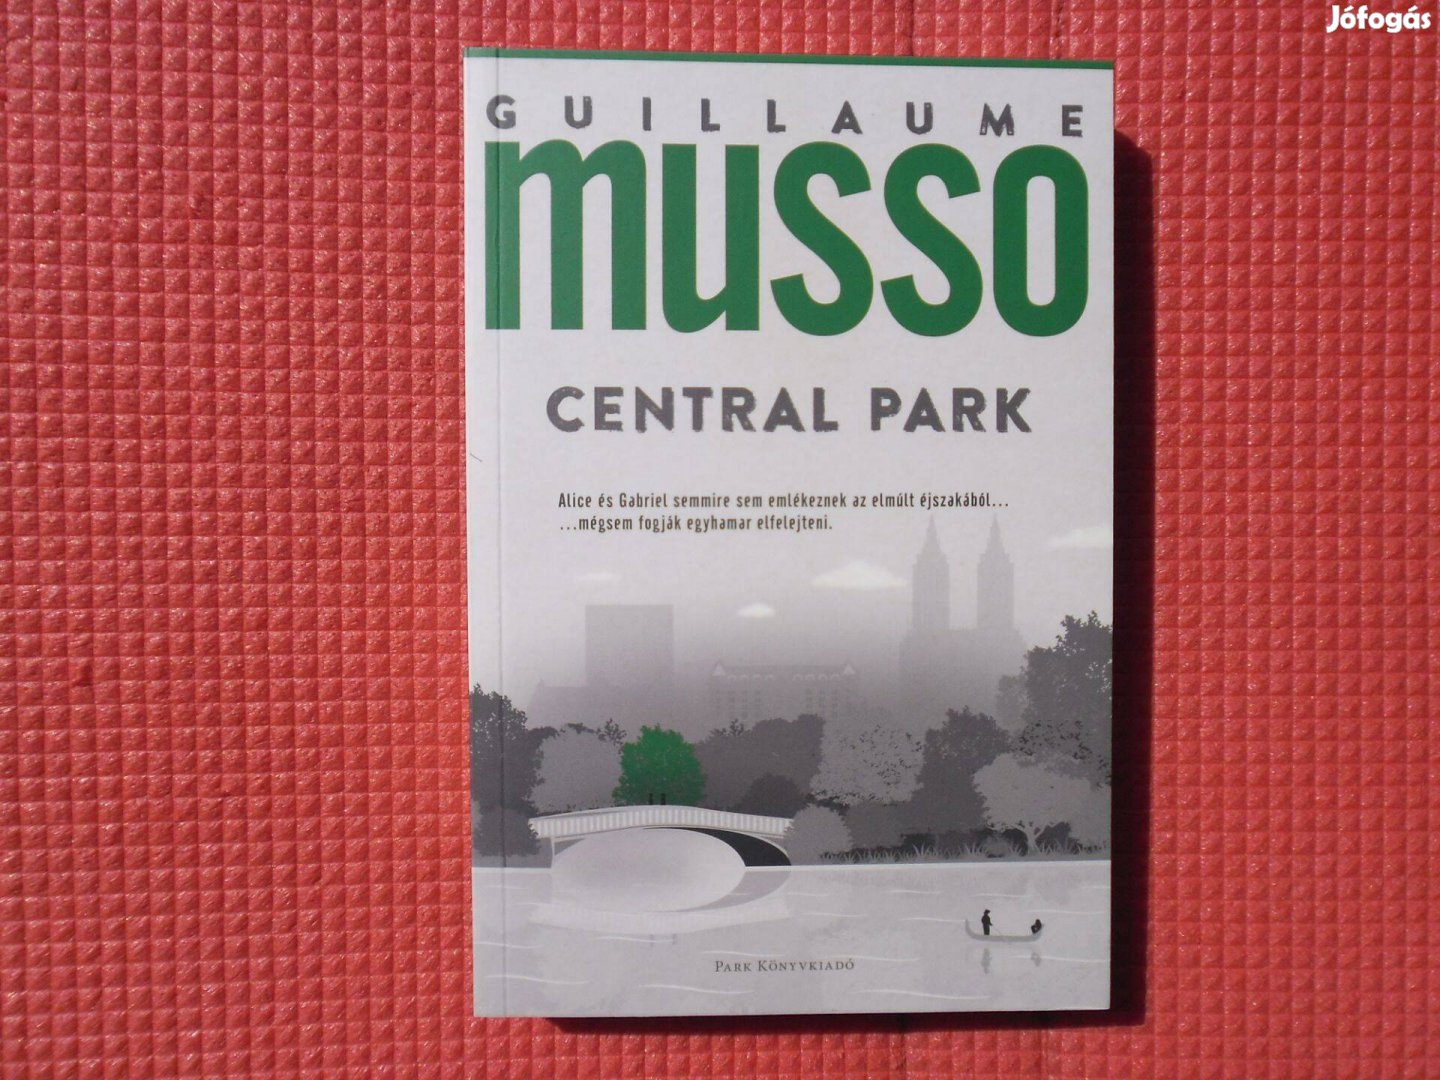 Guillaume Musso: Central Park